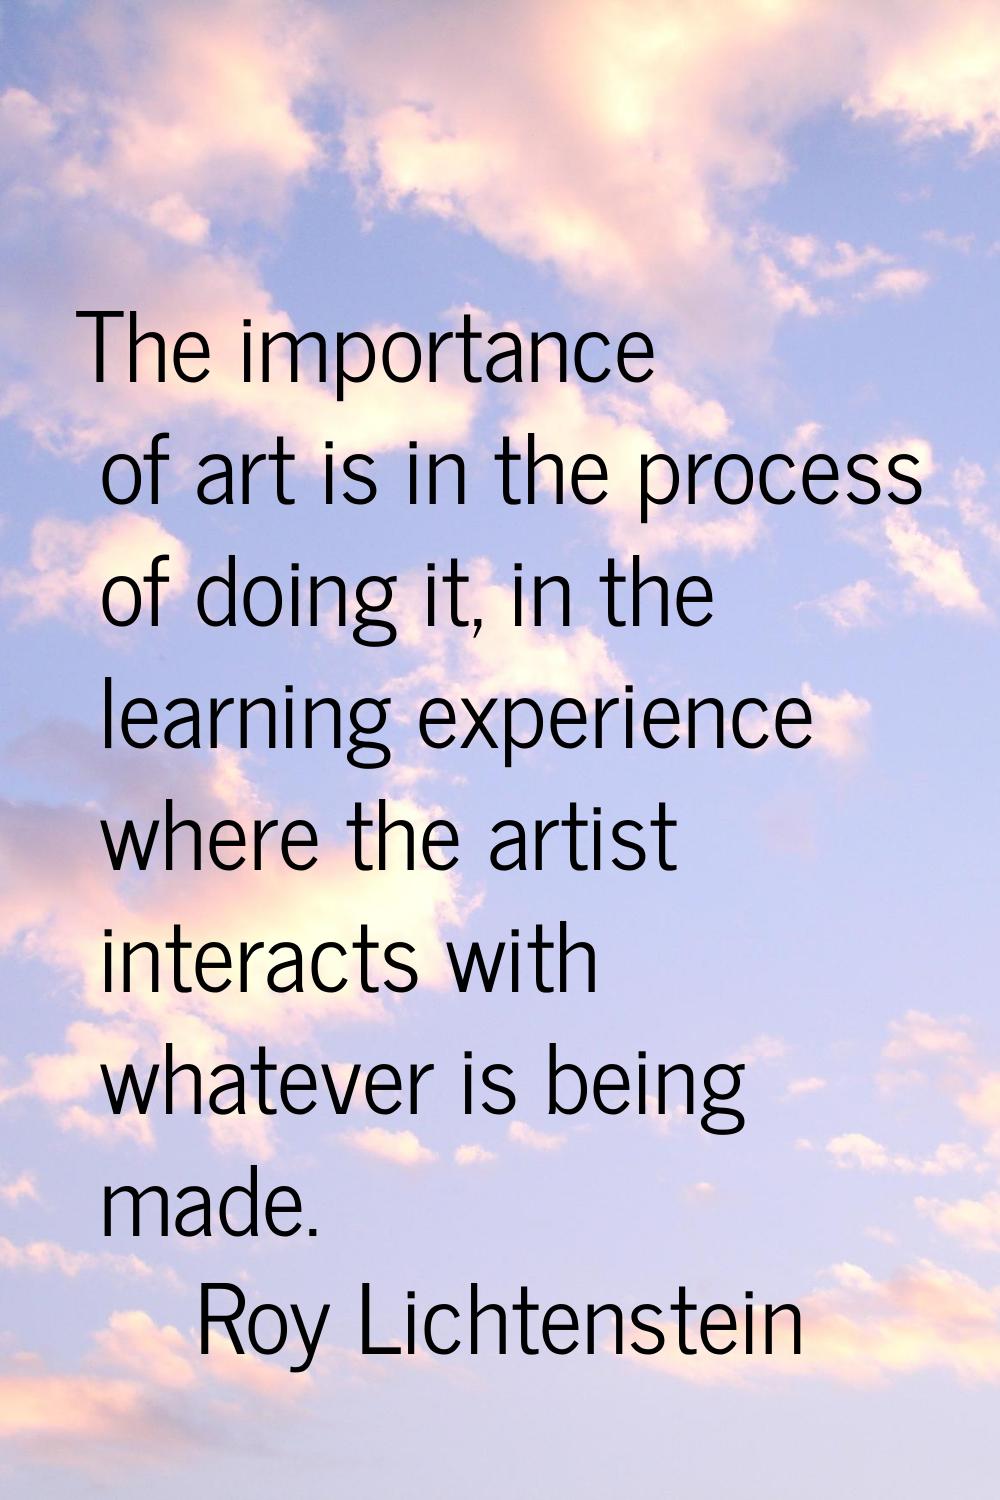 The importance of art is in the process of doing it, in the learning experience where the artist in